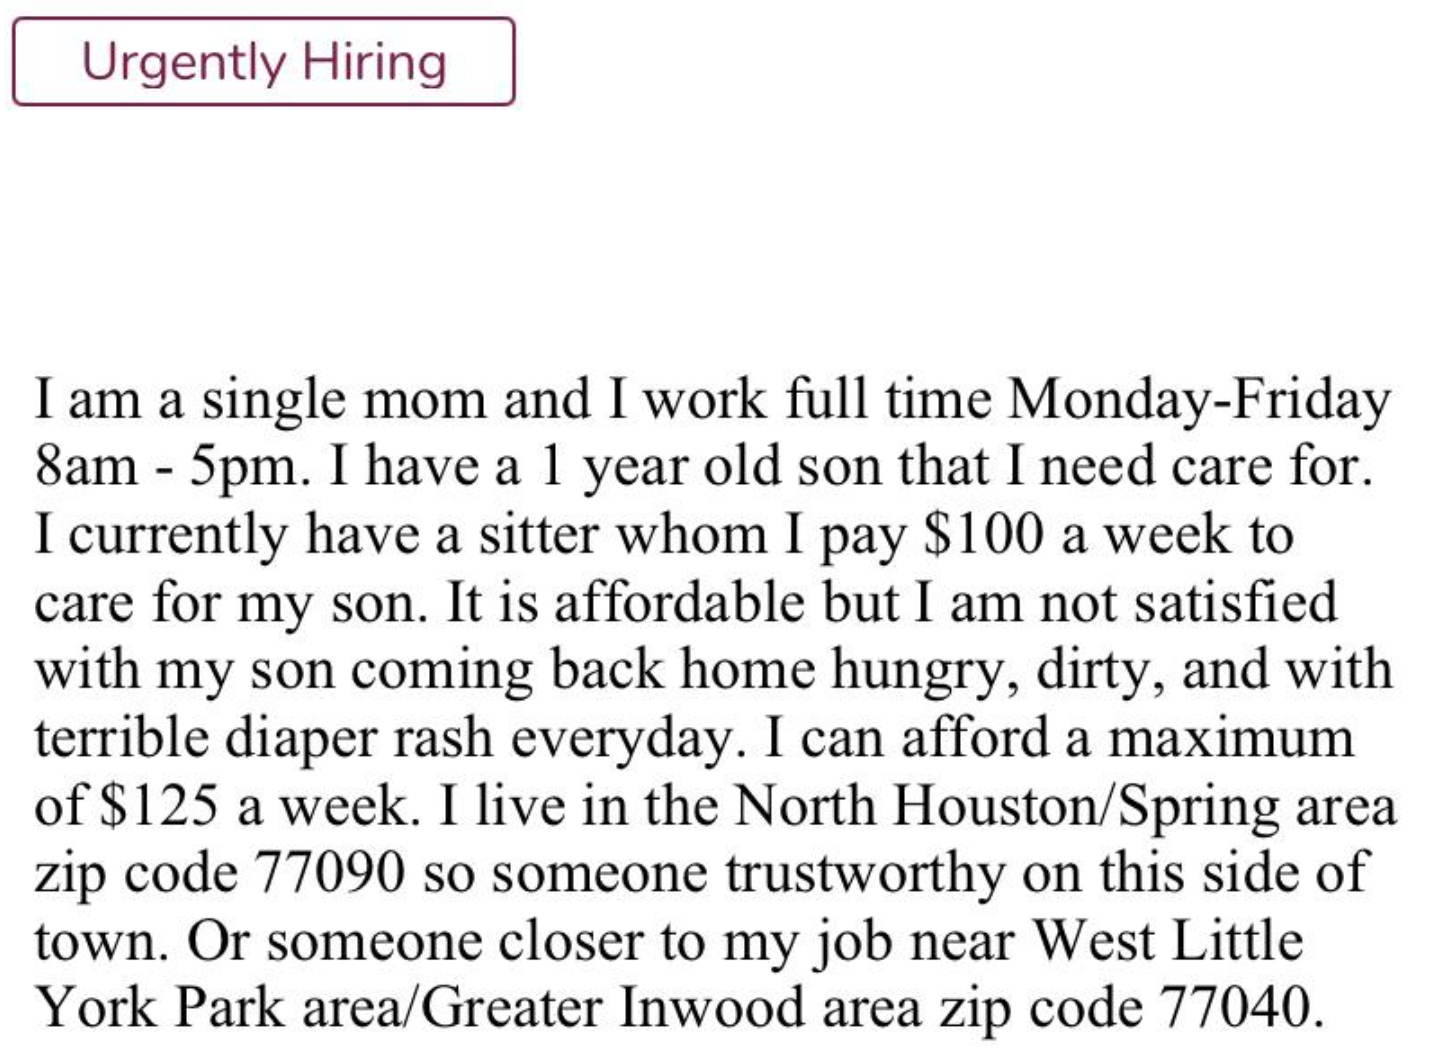 document - Urgently Hiring I am a single mom and I work full time MondayFriday 8am 5pm. I have a 1 year old son that I need care for. I currently have a sitter whom I pay $100 a week to care for my son. It is affordable but I am not satisfied with my son 